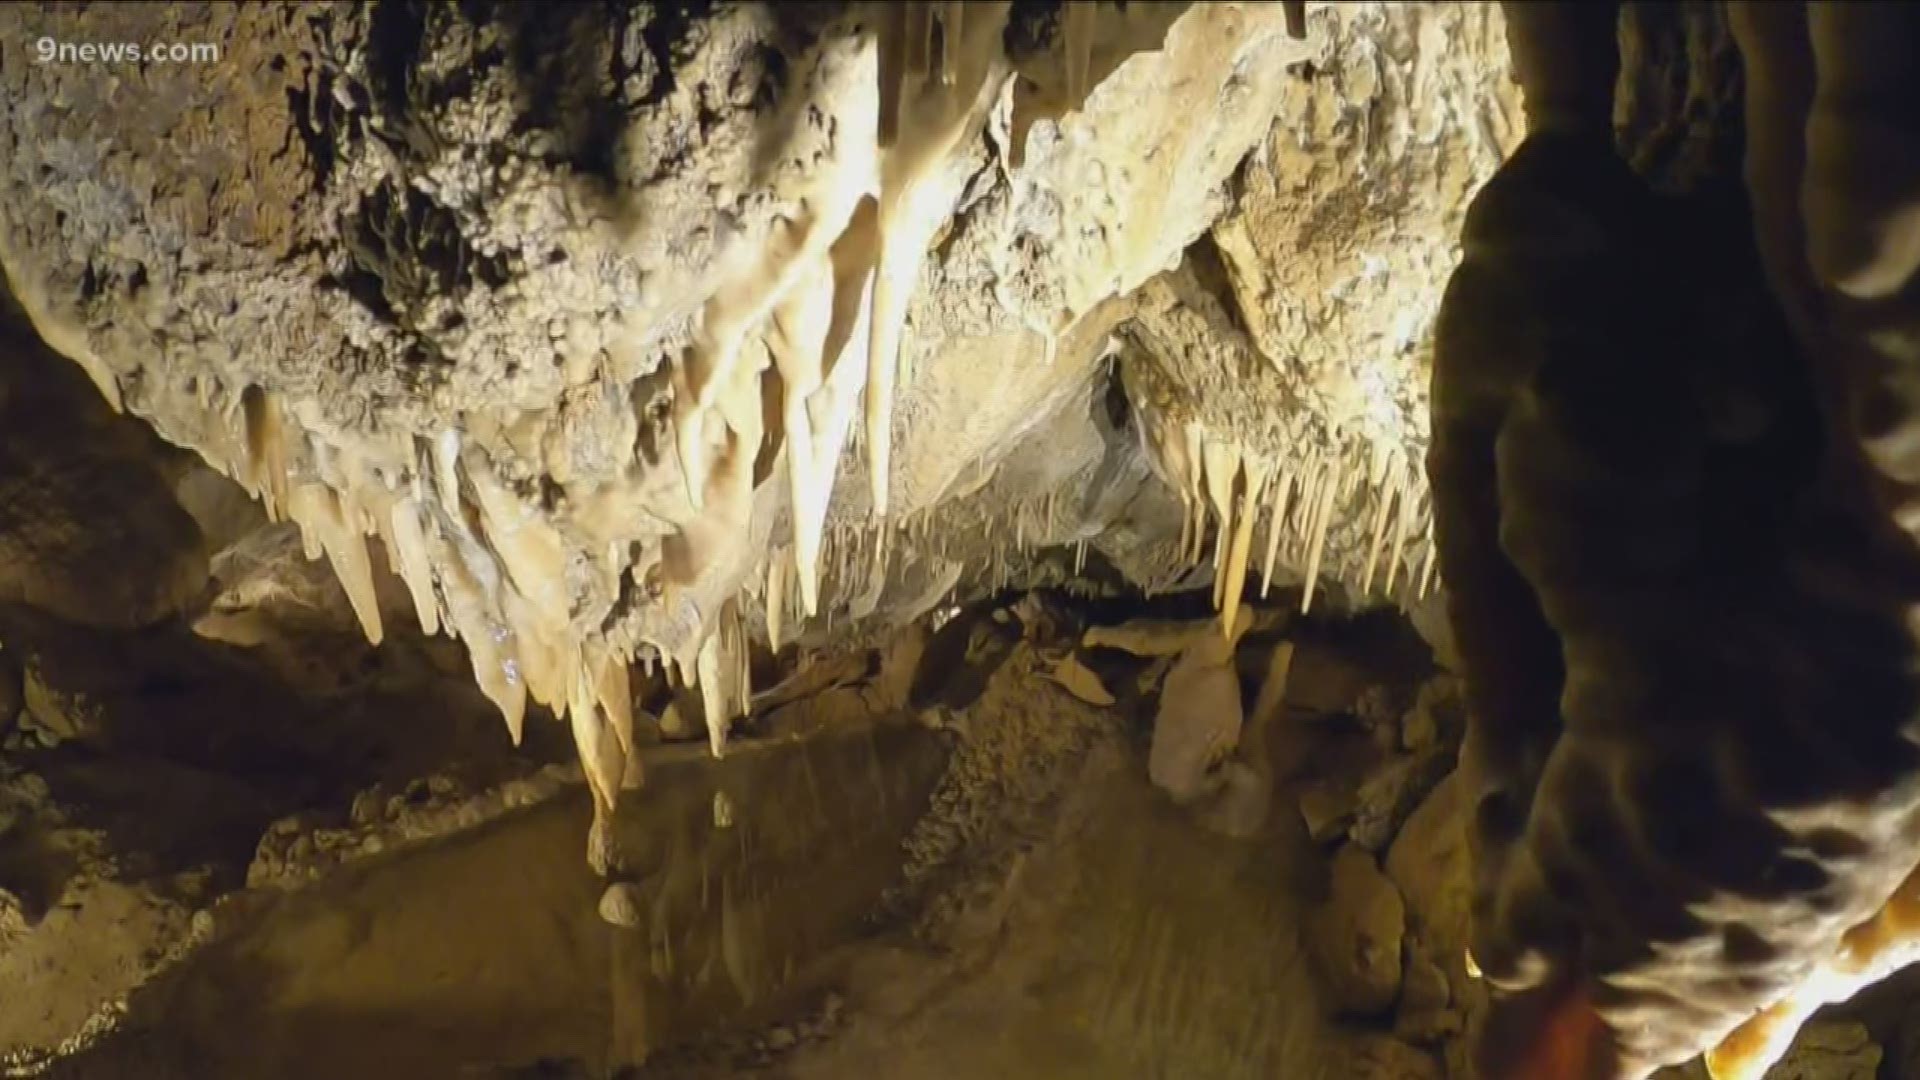 A new cave has been discovered in Glenwood Springs and it’s near one of the busiest caves for tourists in the state.